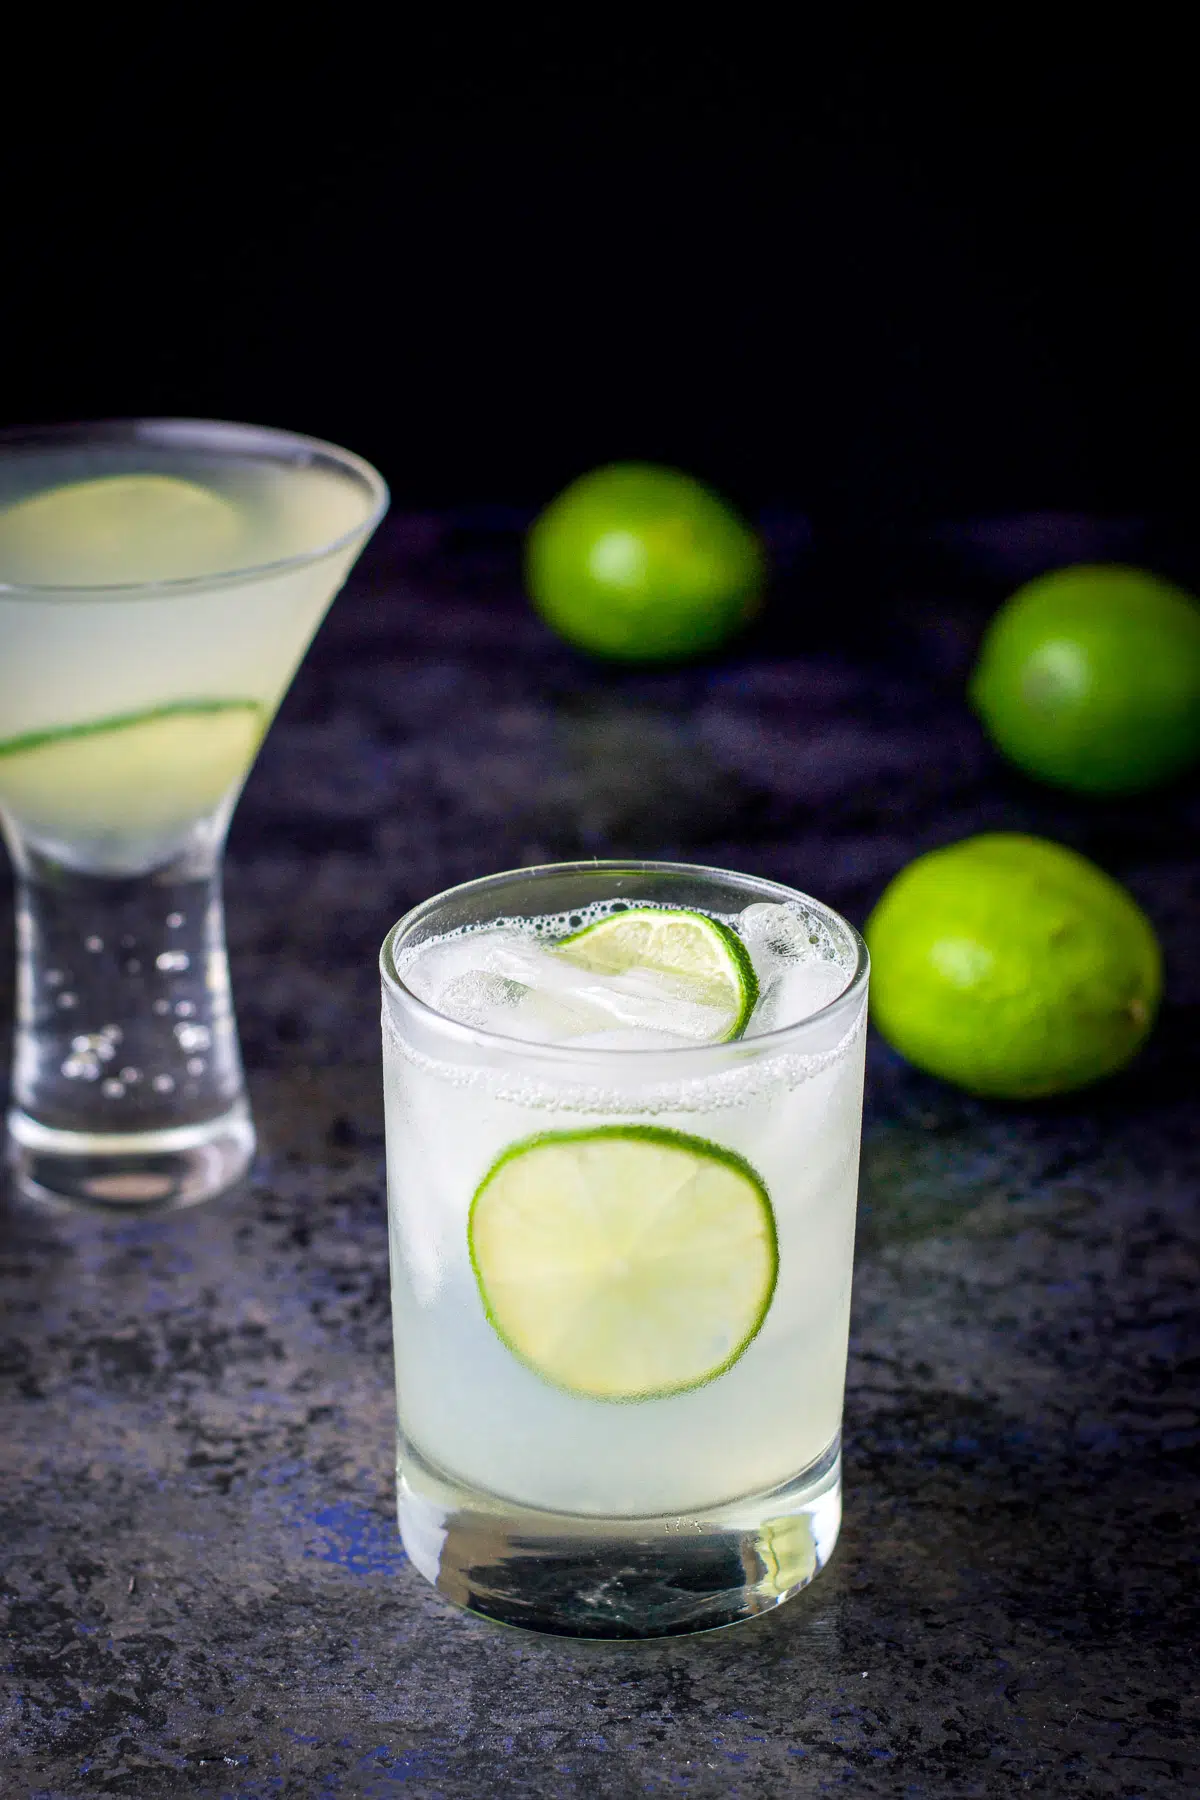 Two lime wheels floating in the gimlet with limes on the table